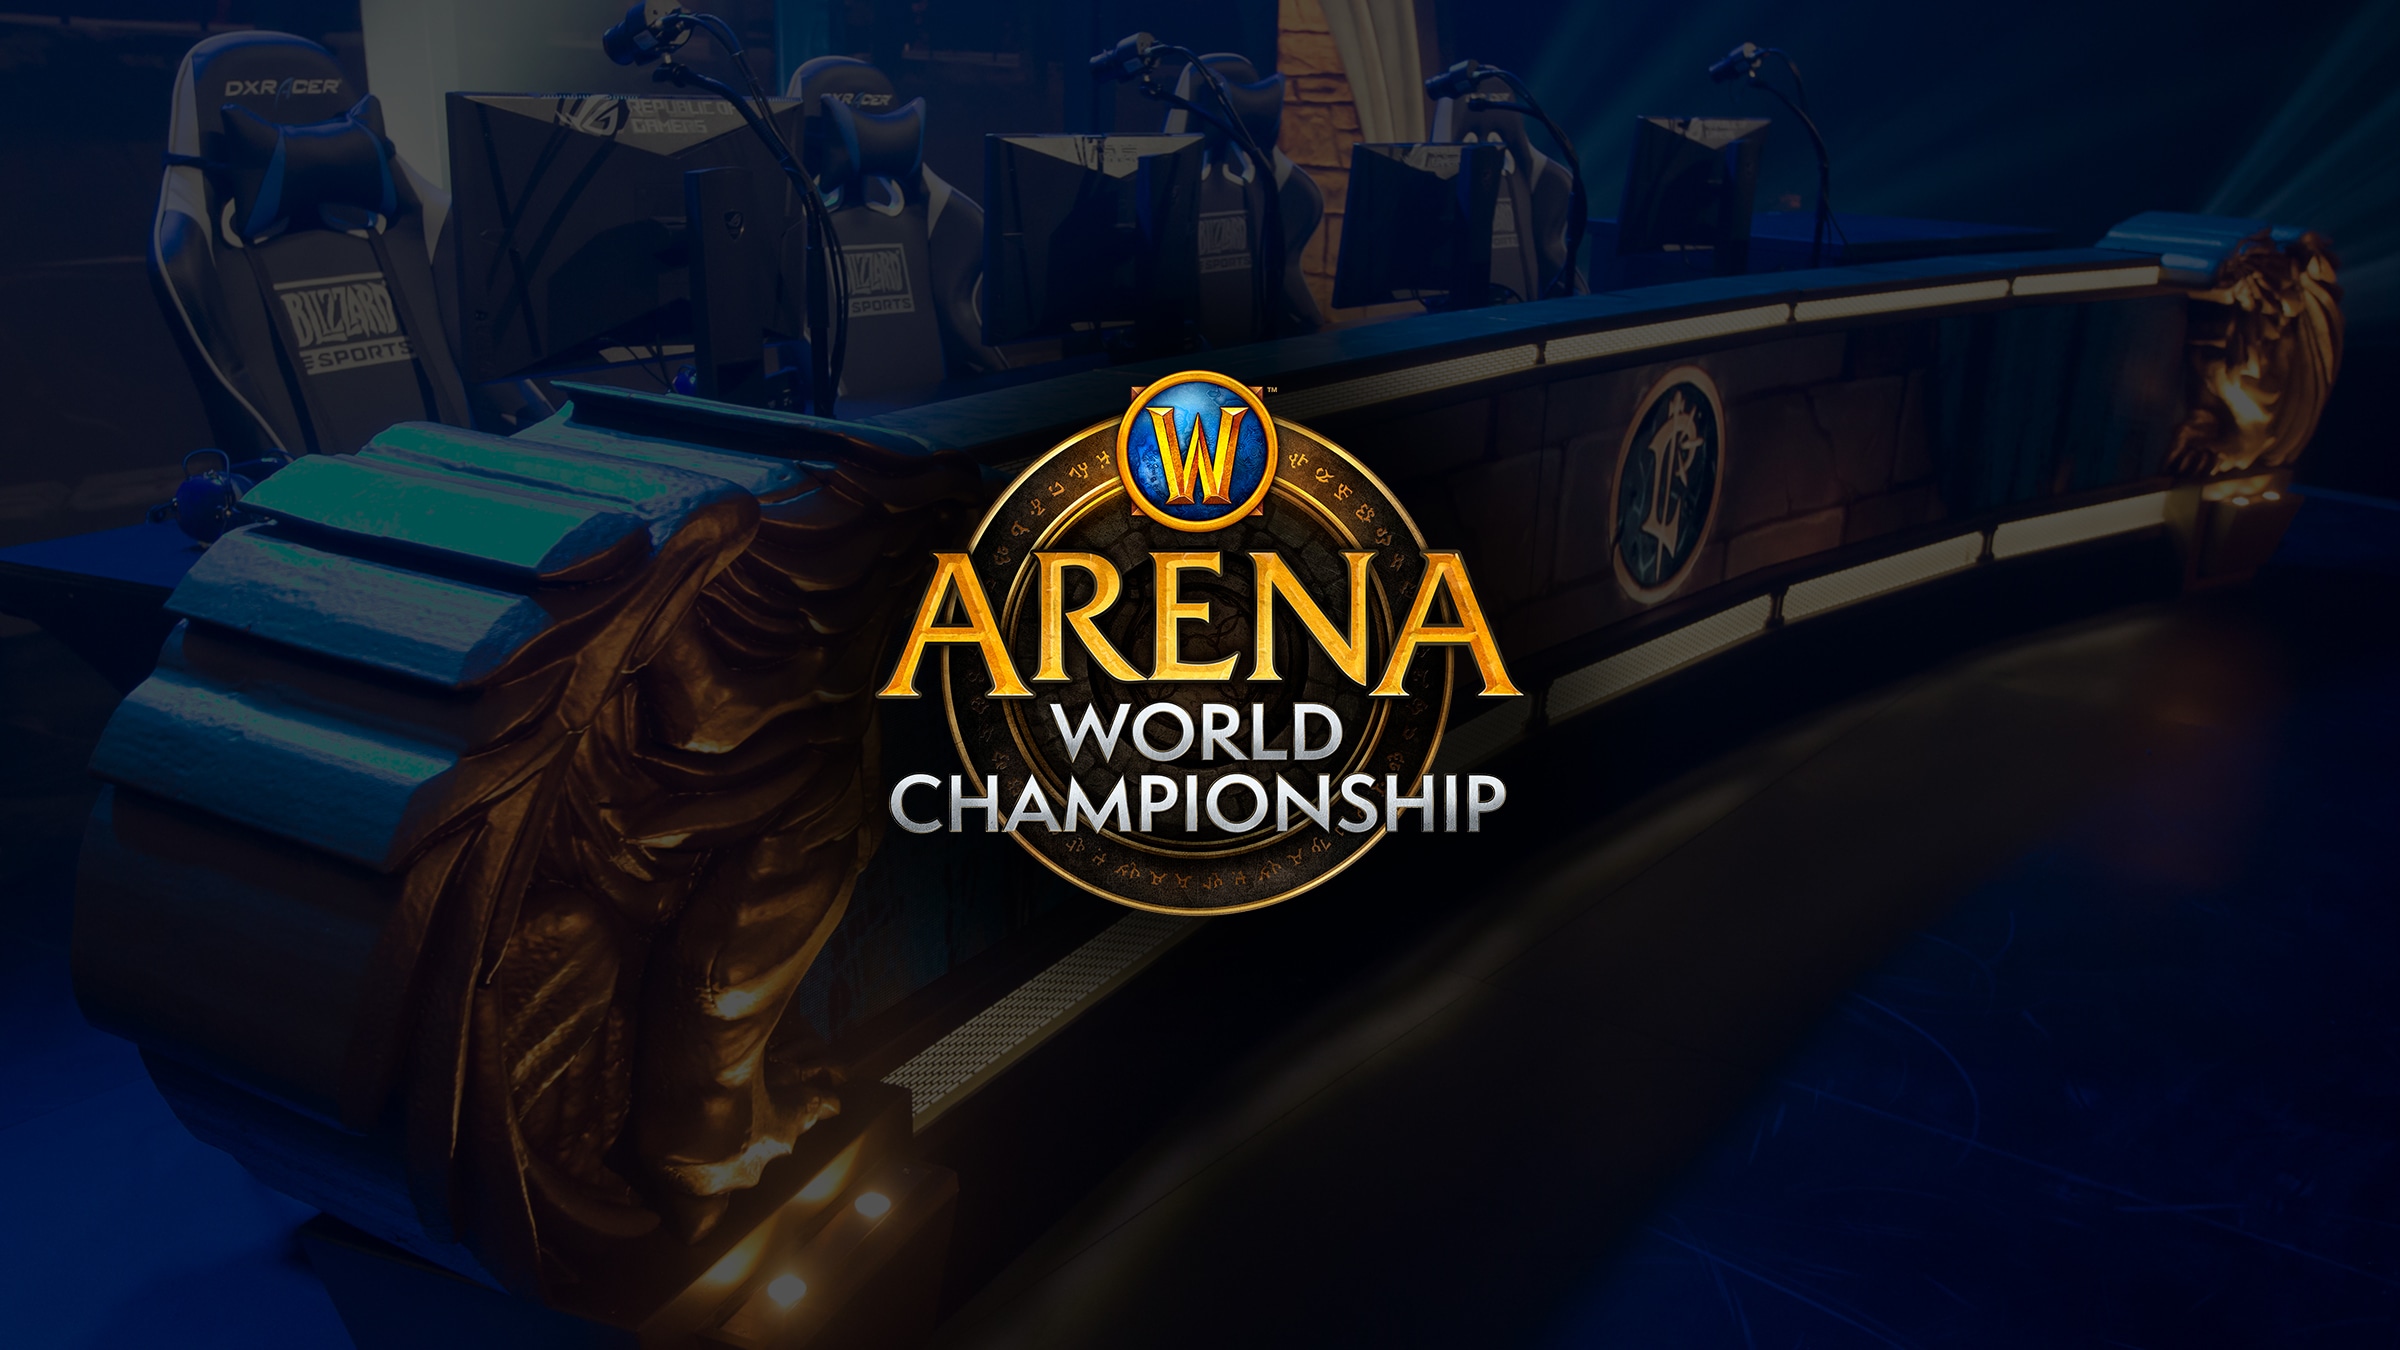 Tune in May 19-20 for the WoW Arena Championship: North American Qualifier Cup 1